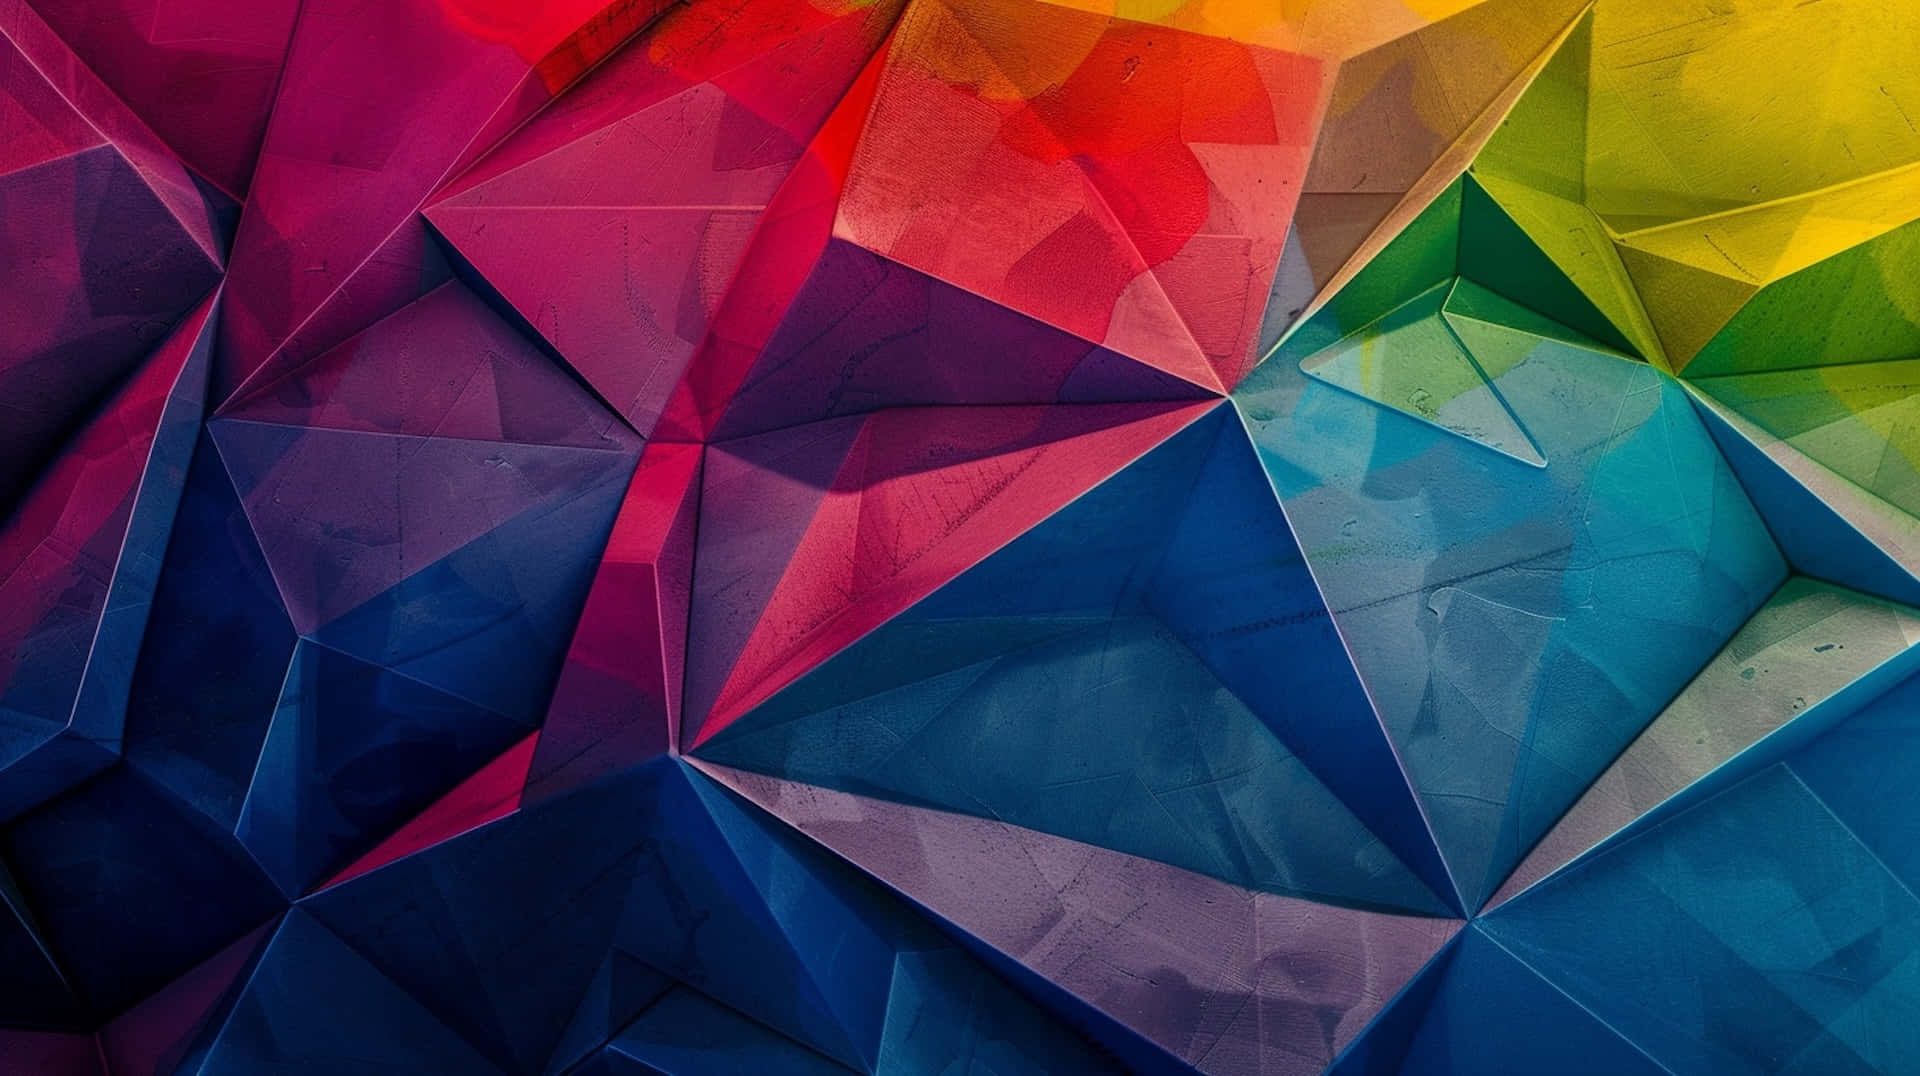 Abstract Colorful Geometric Pattern.jpg Wallpaper